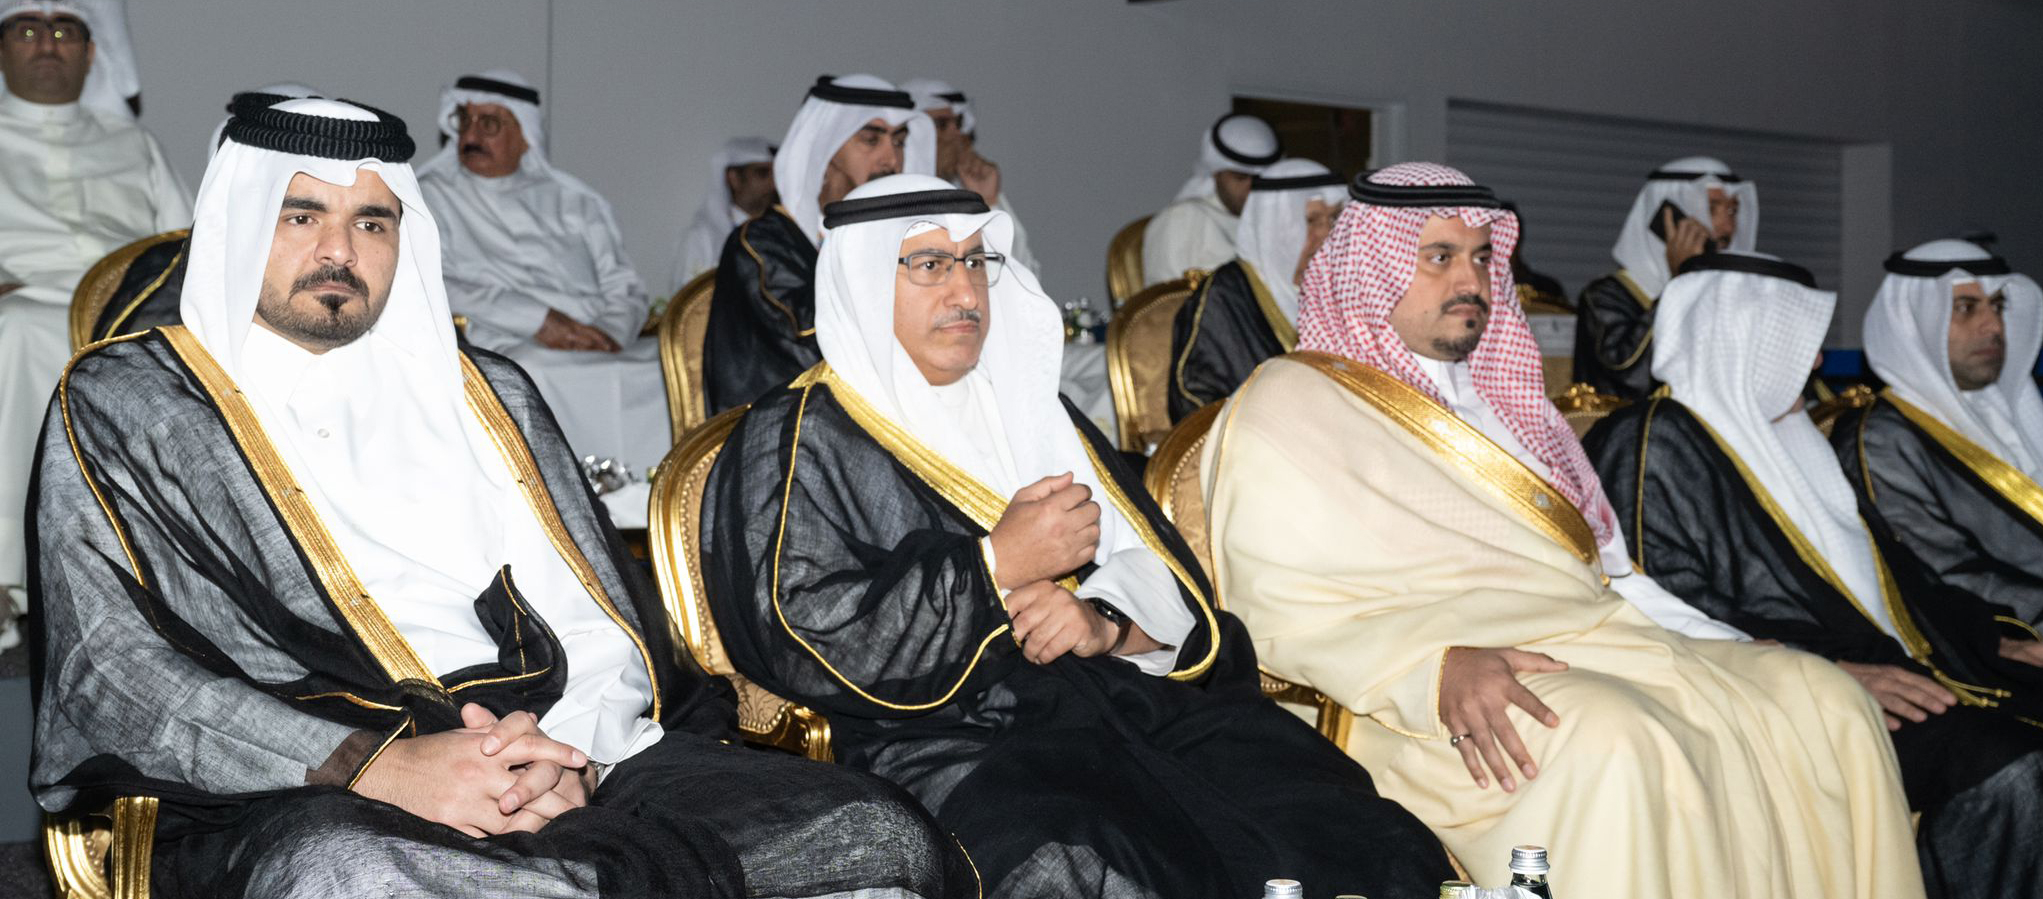 H.E. Sheikh Joaan attends opening ceremony of GCC Games